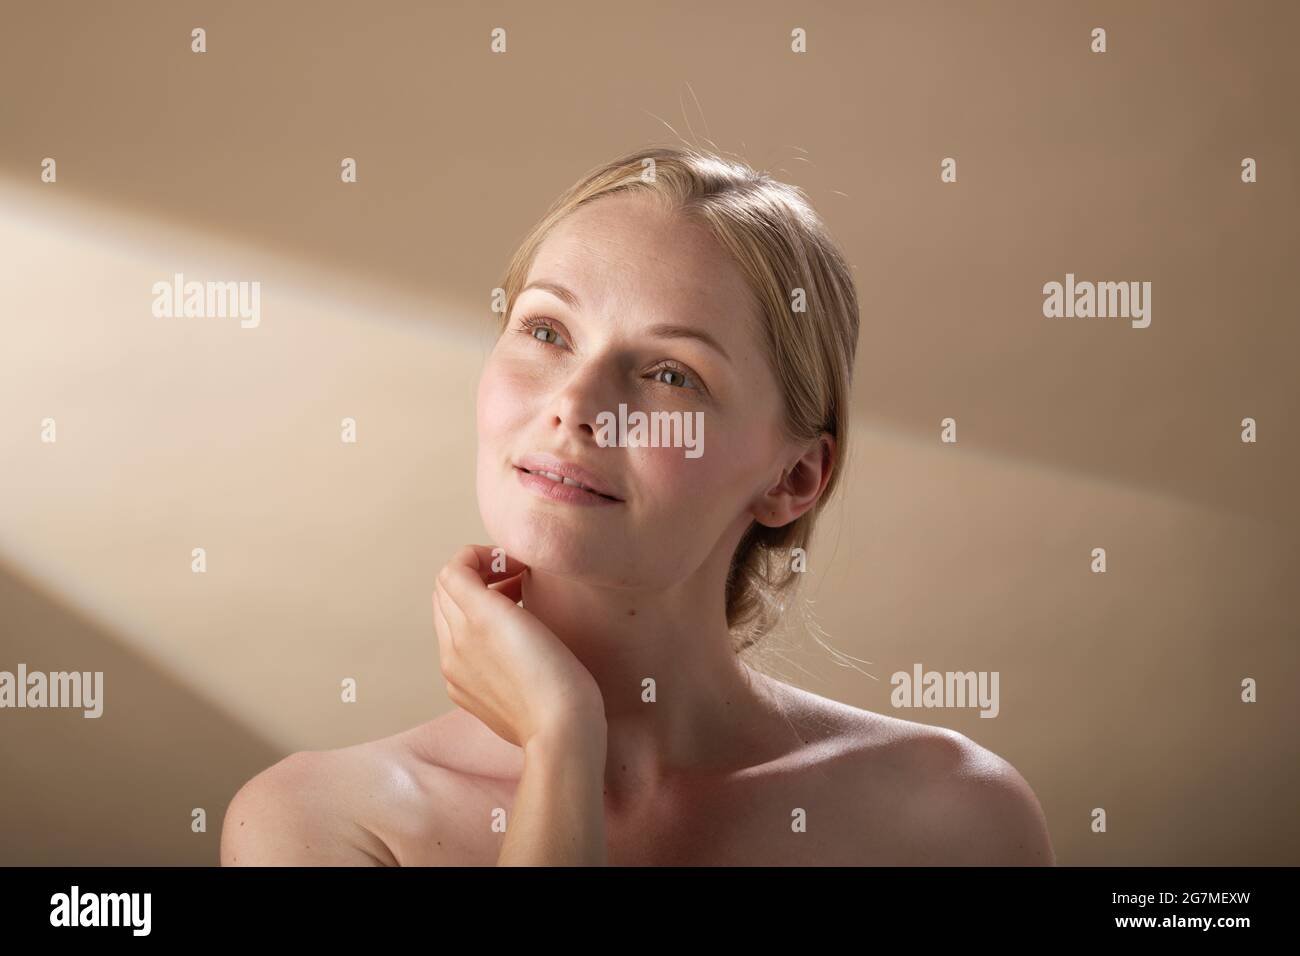 Beauty treatment regime. Contented woman. Distant thoughts. Stock Photo